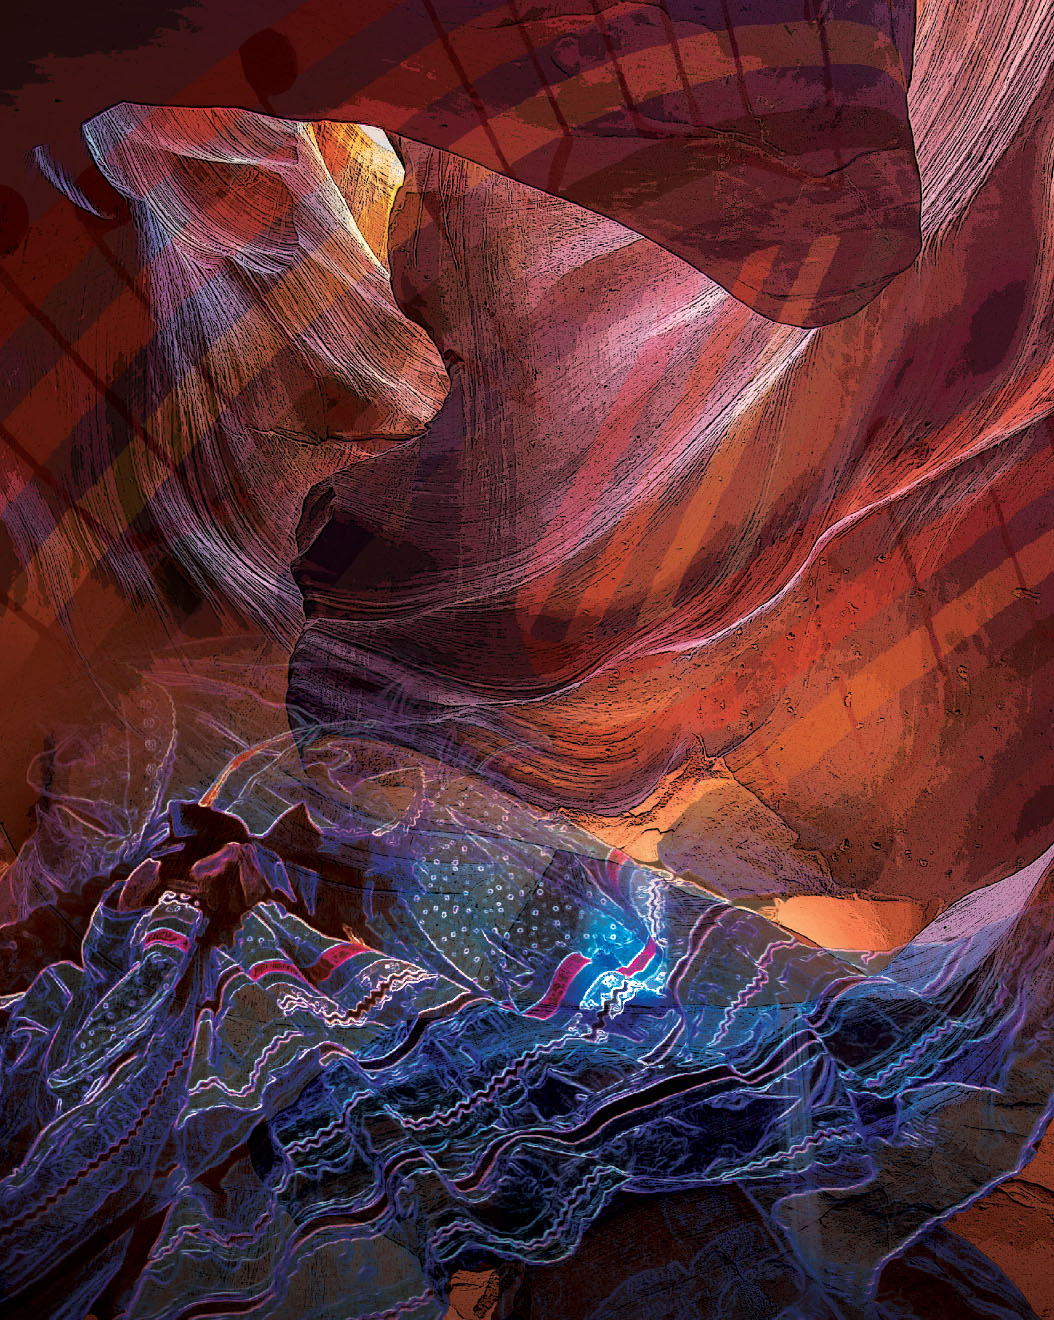 artistic rendering of a Mexican-patterned cloth floating in a wind-sculpted canyon. Hints of music notes follow the walls.